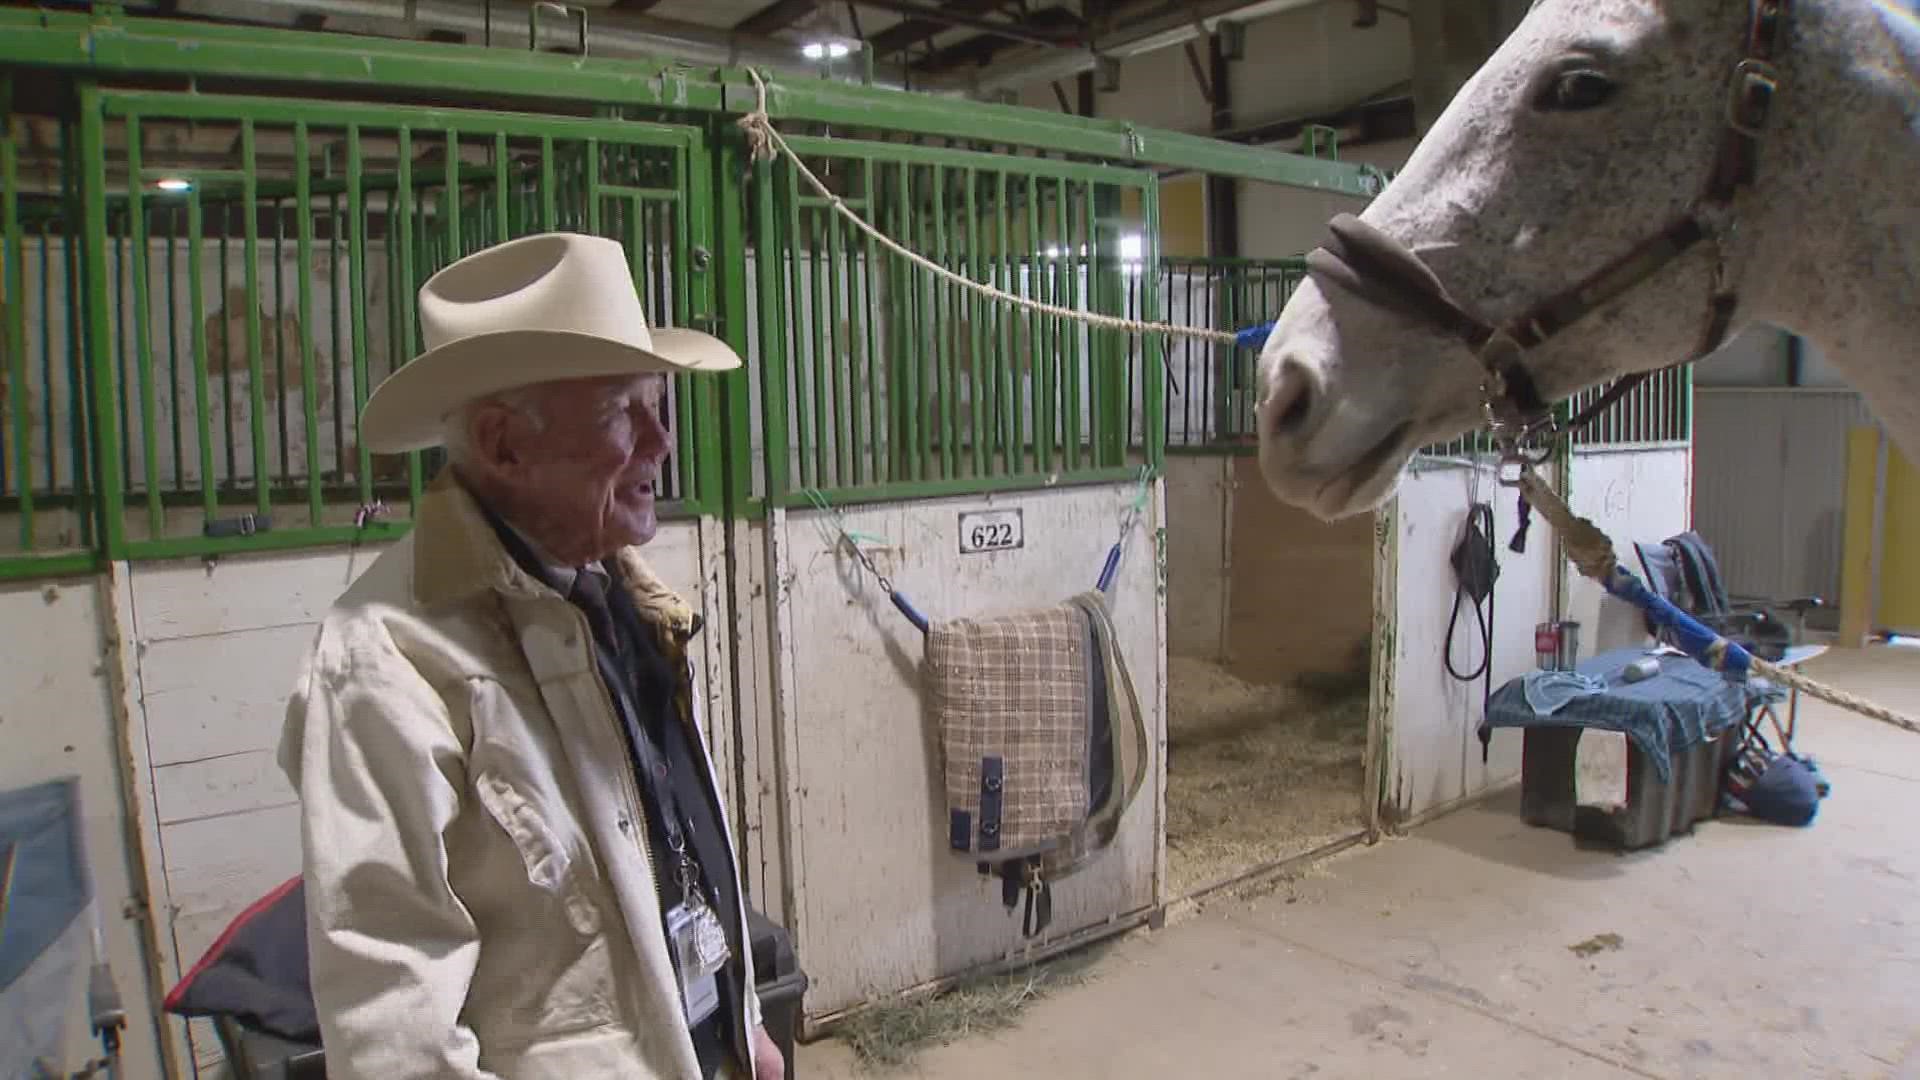 Dr. Marvin Beeman has been working as a National Western Stock Show veterinarian decades.